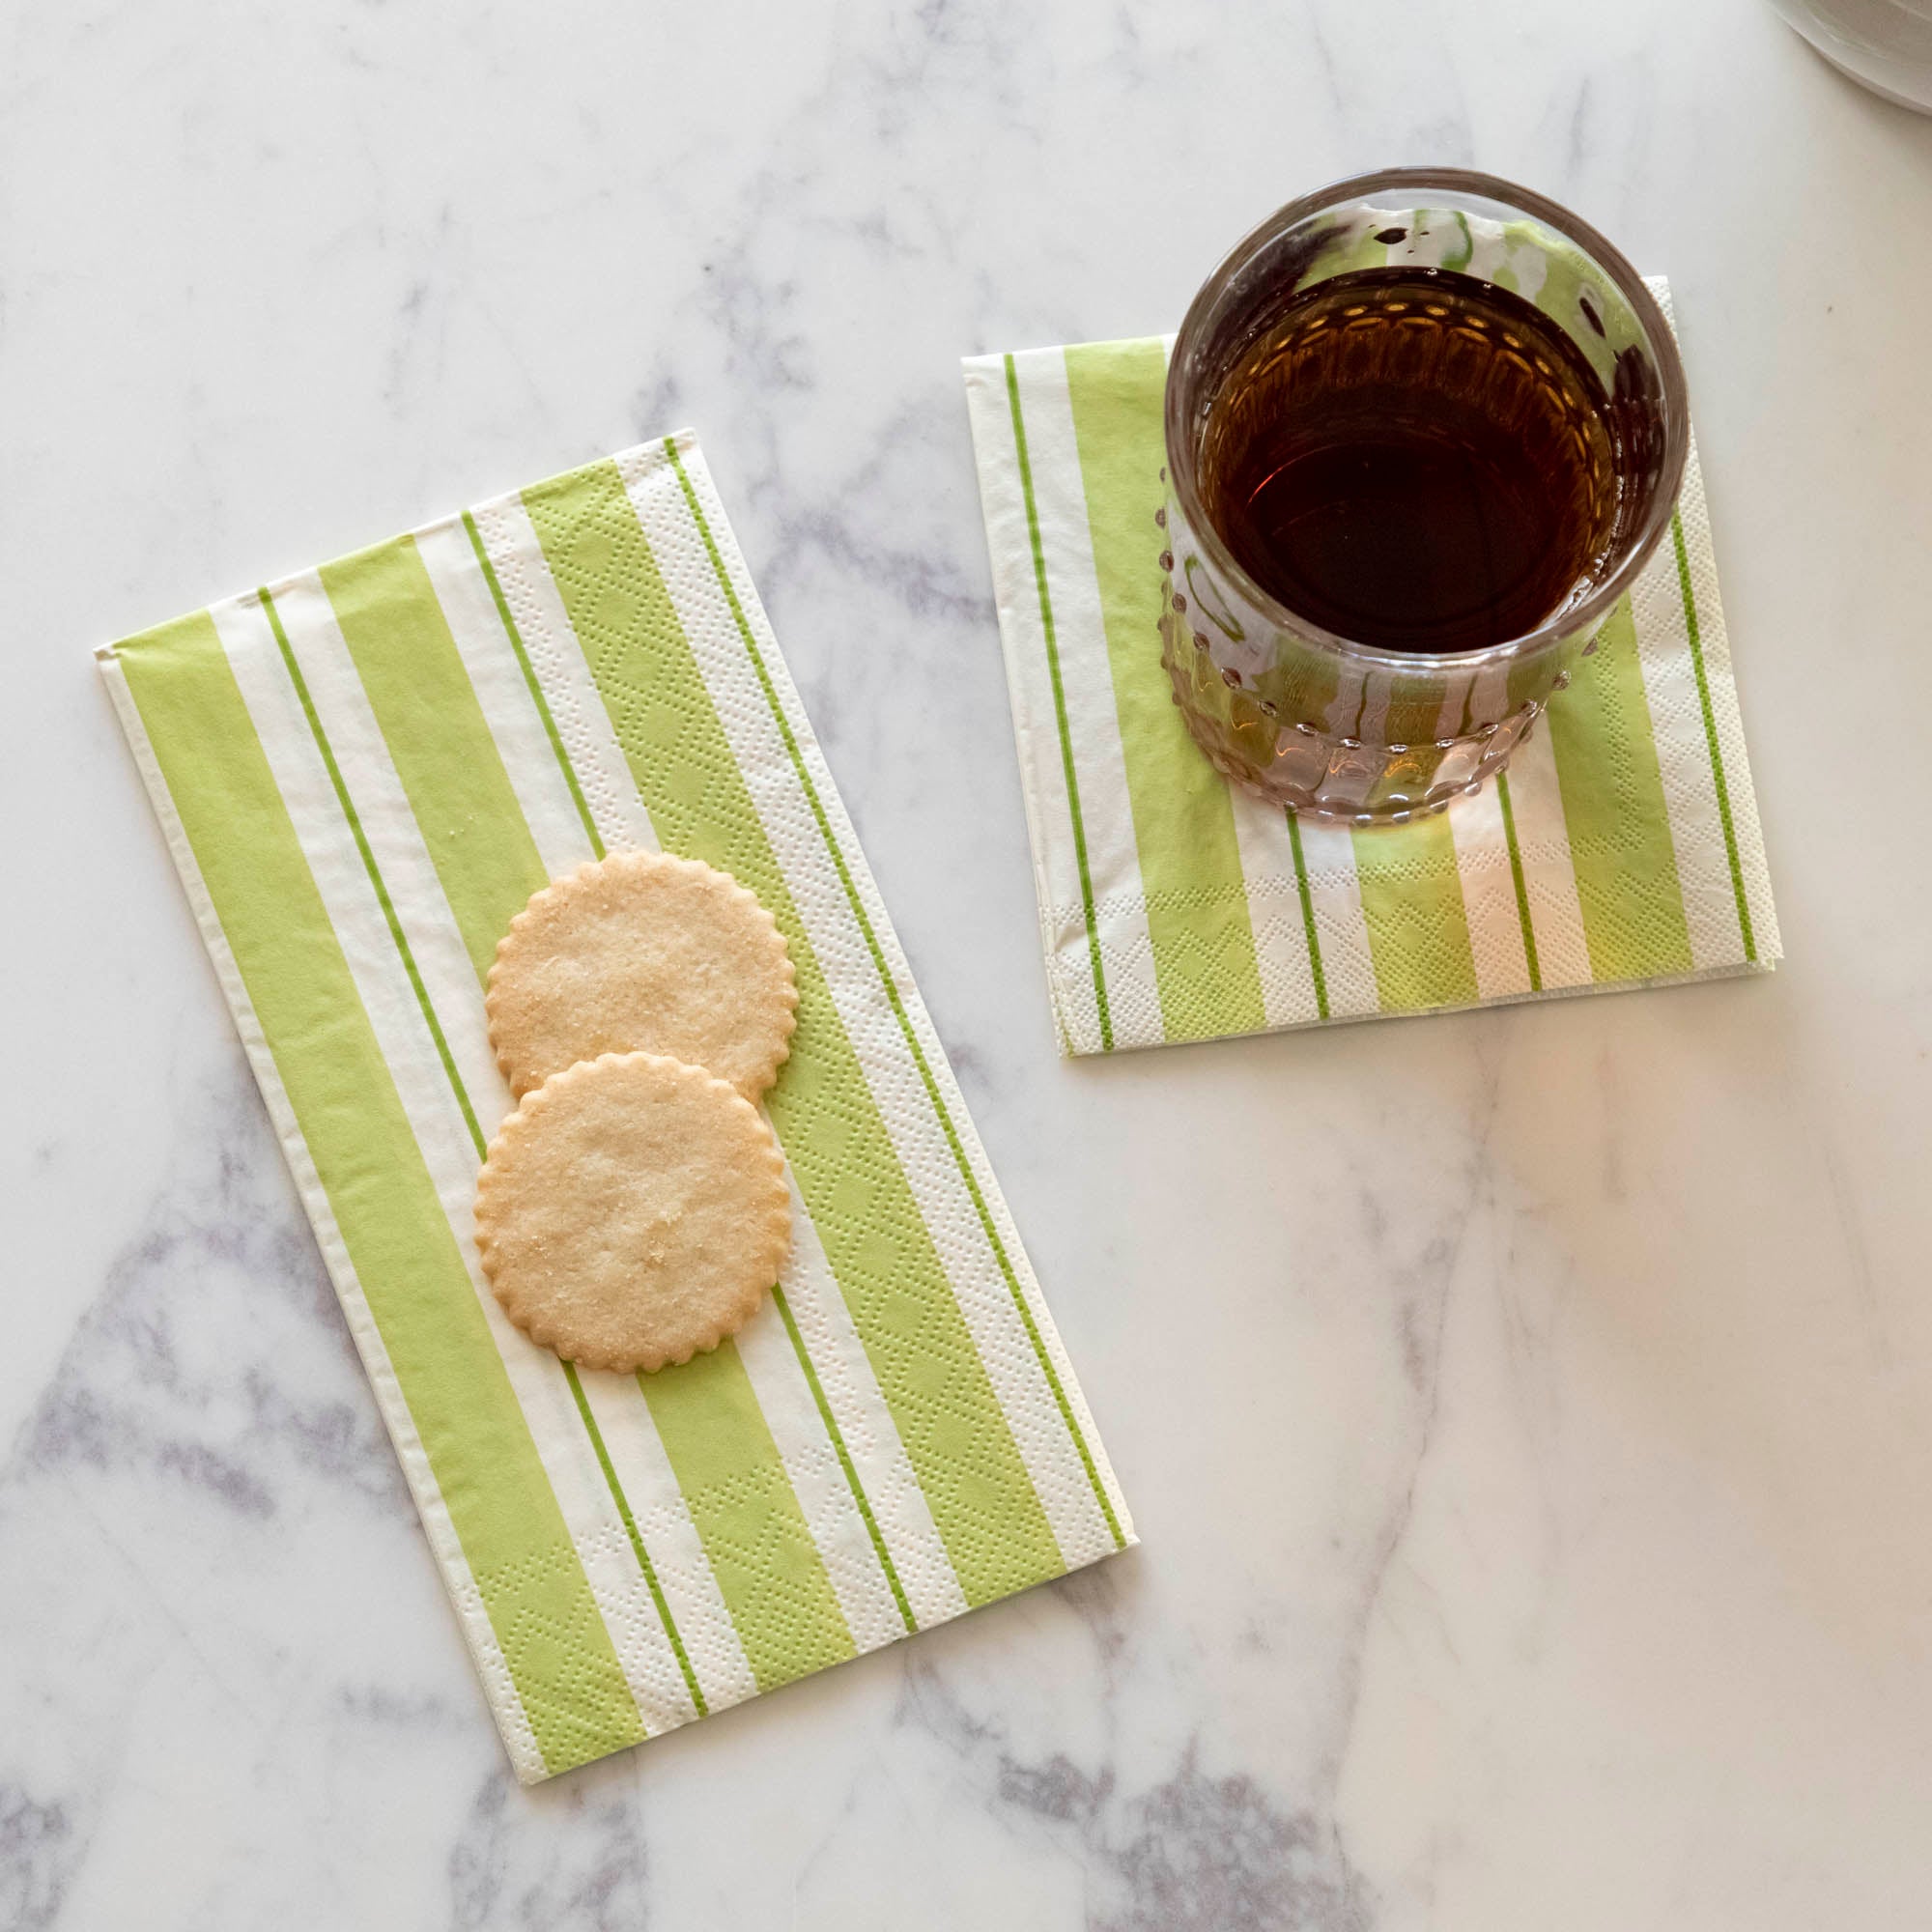 Two Green Awning Strip Napkins on a white table: a Guest napkin with two sugar cookies on it, and a Cocktail napkin under a glass.